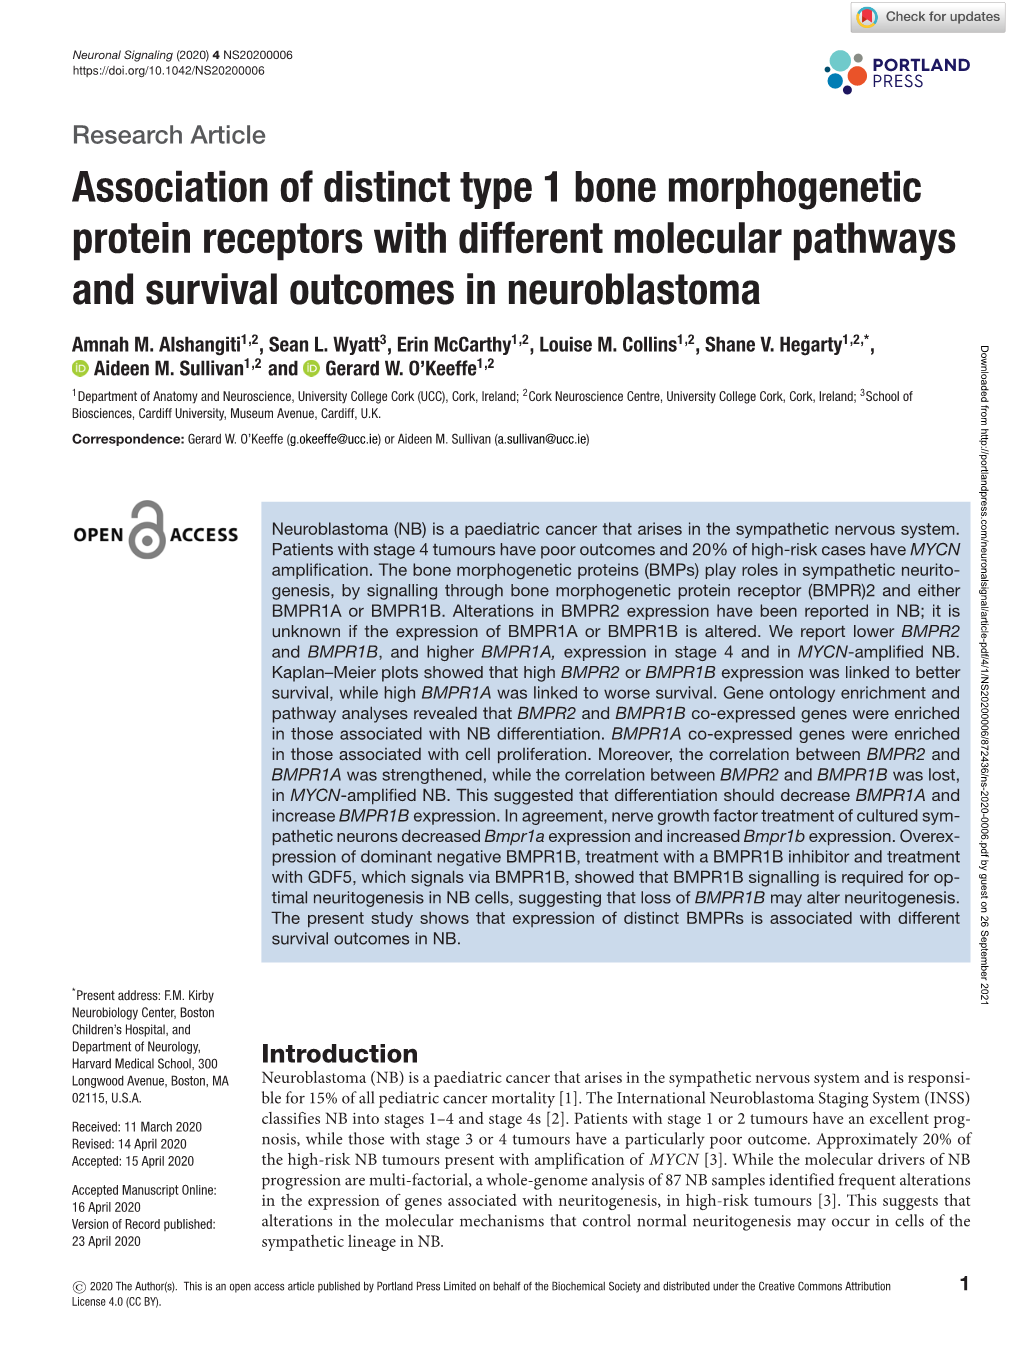 Association of Distinct Type 1 Bone Morphogenetic Protein Receptors with Different Molecular Pathways and Survival Outcomes in Neuroblastoma